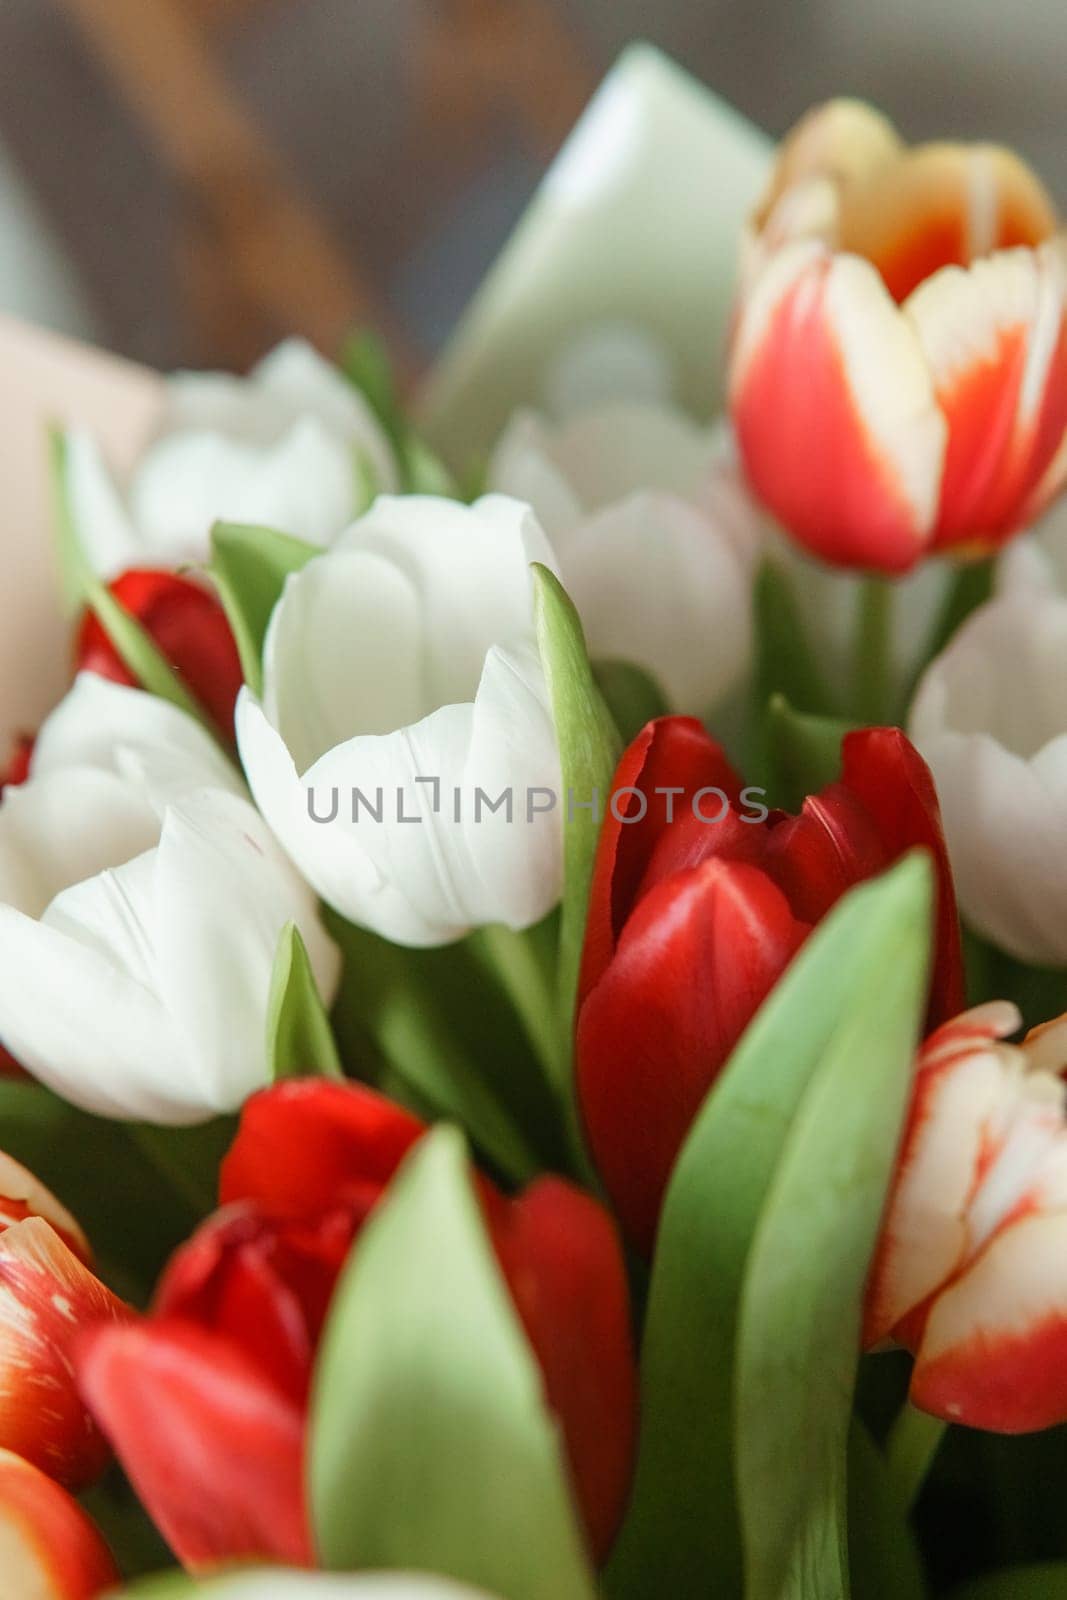 Spring Gift: Bright Tulip Bouquet for a Special March 8th Celebration by Annu1tochka